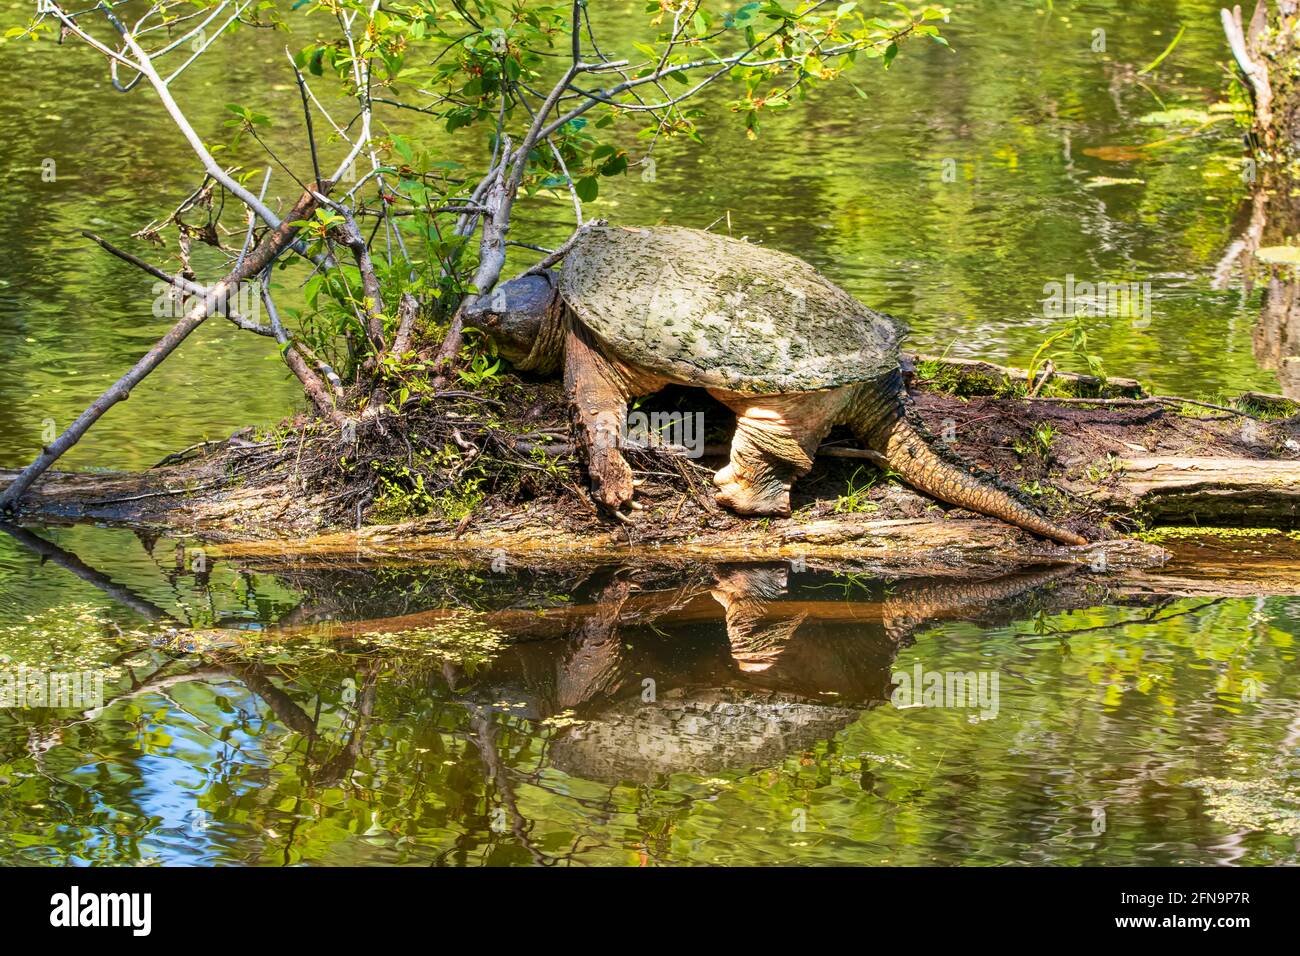 Huge snapping turtle in the sun on a log in a lake with a green nature background Stock Photo